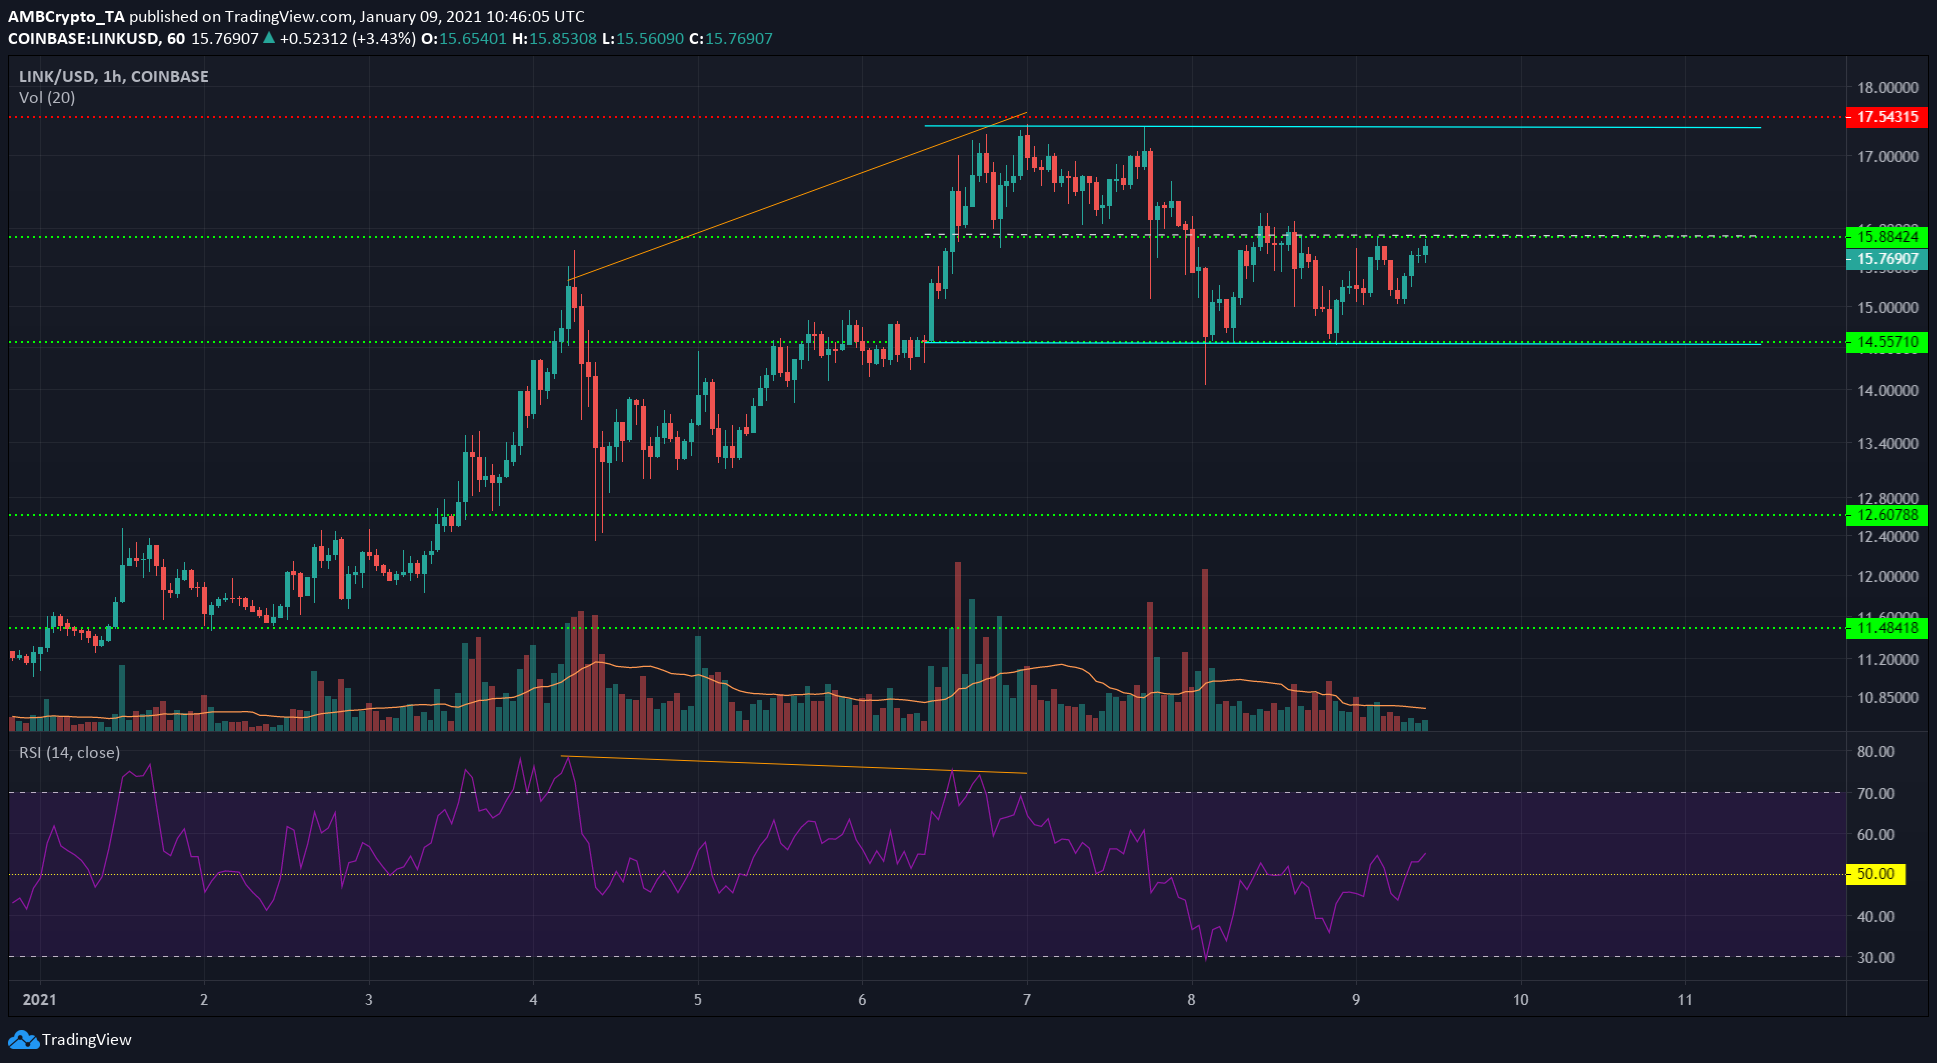 Chainlink, Ethereum Classic, Compound Price Analysis: 09 January